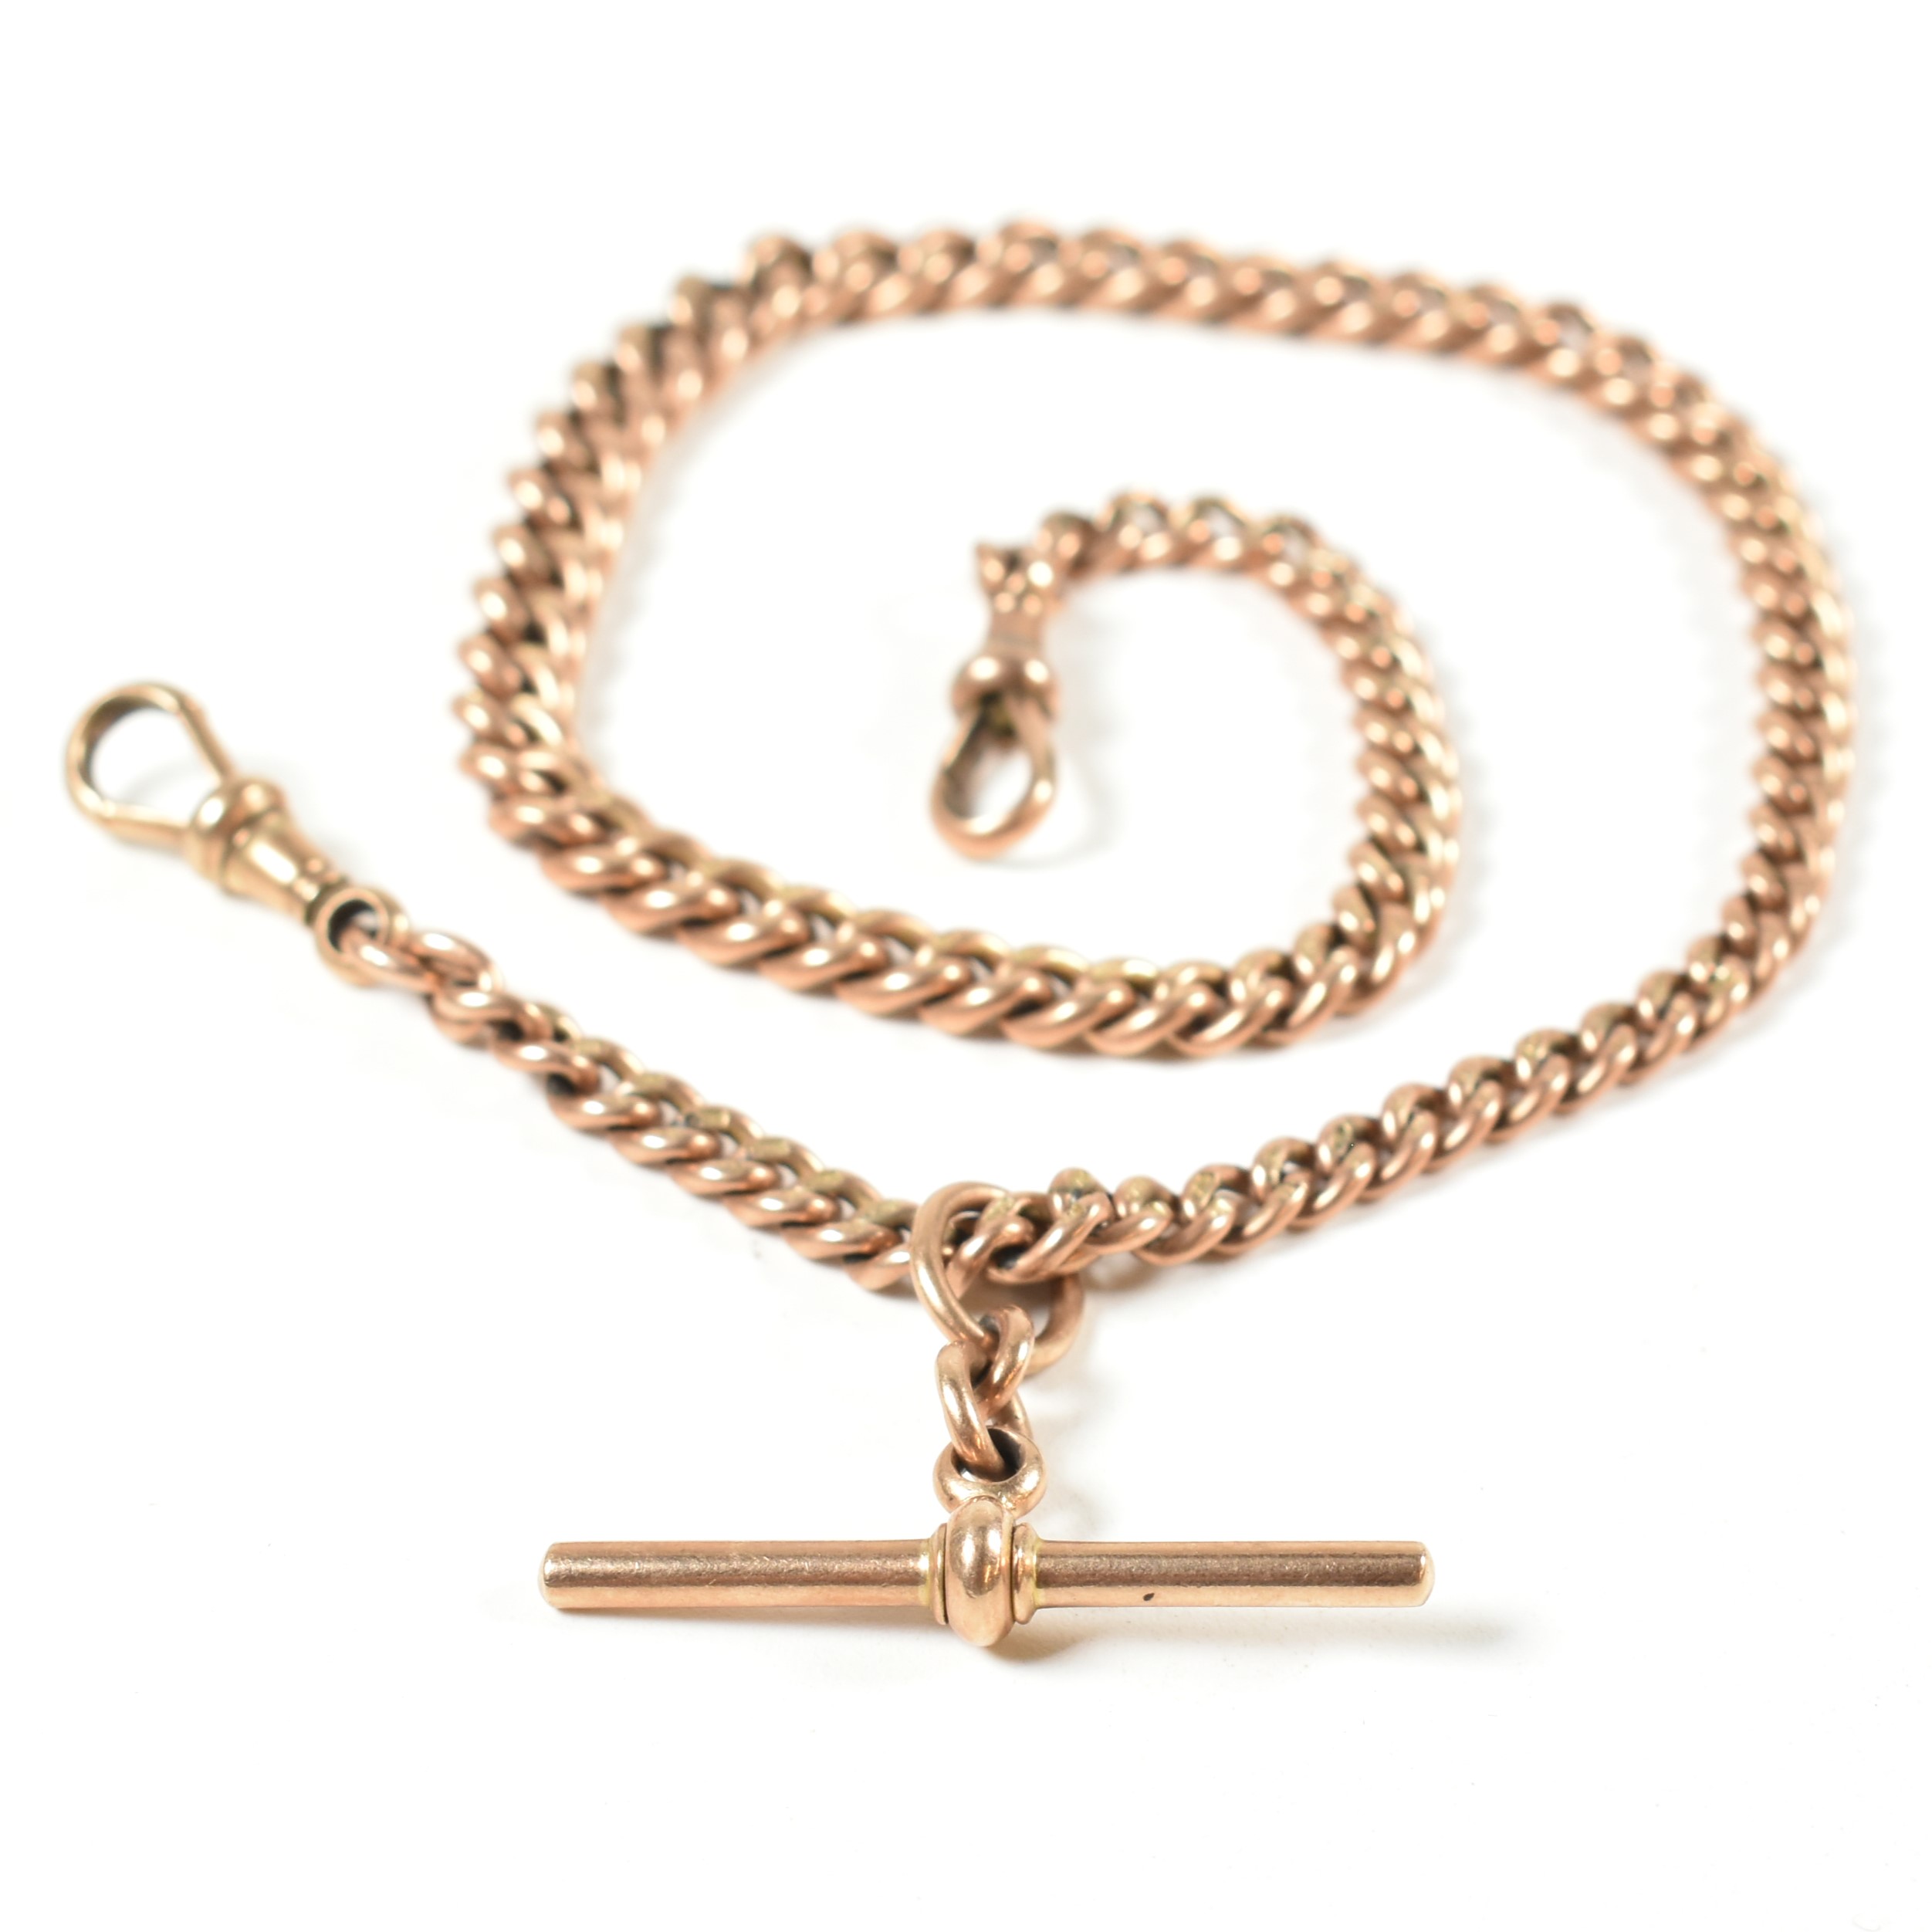 GEORGE V HALLMARKED 9CT ROSE GOLD WATCH CHAIN - Image 2 of 5